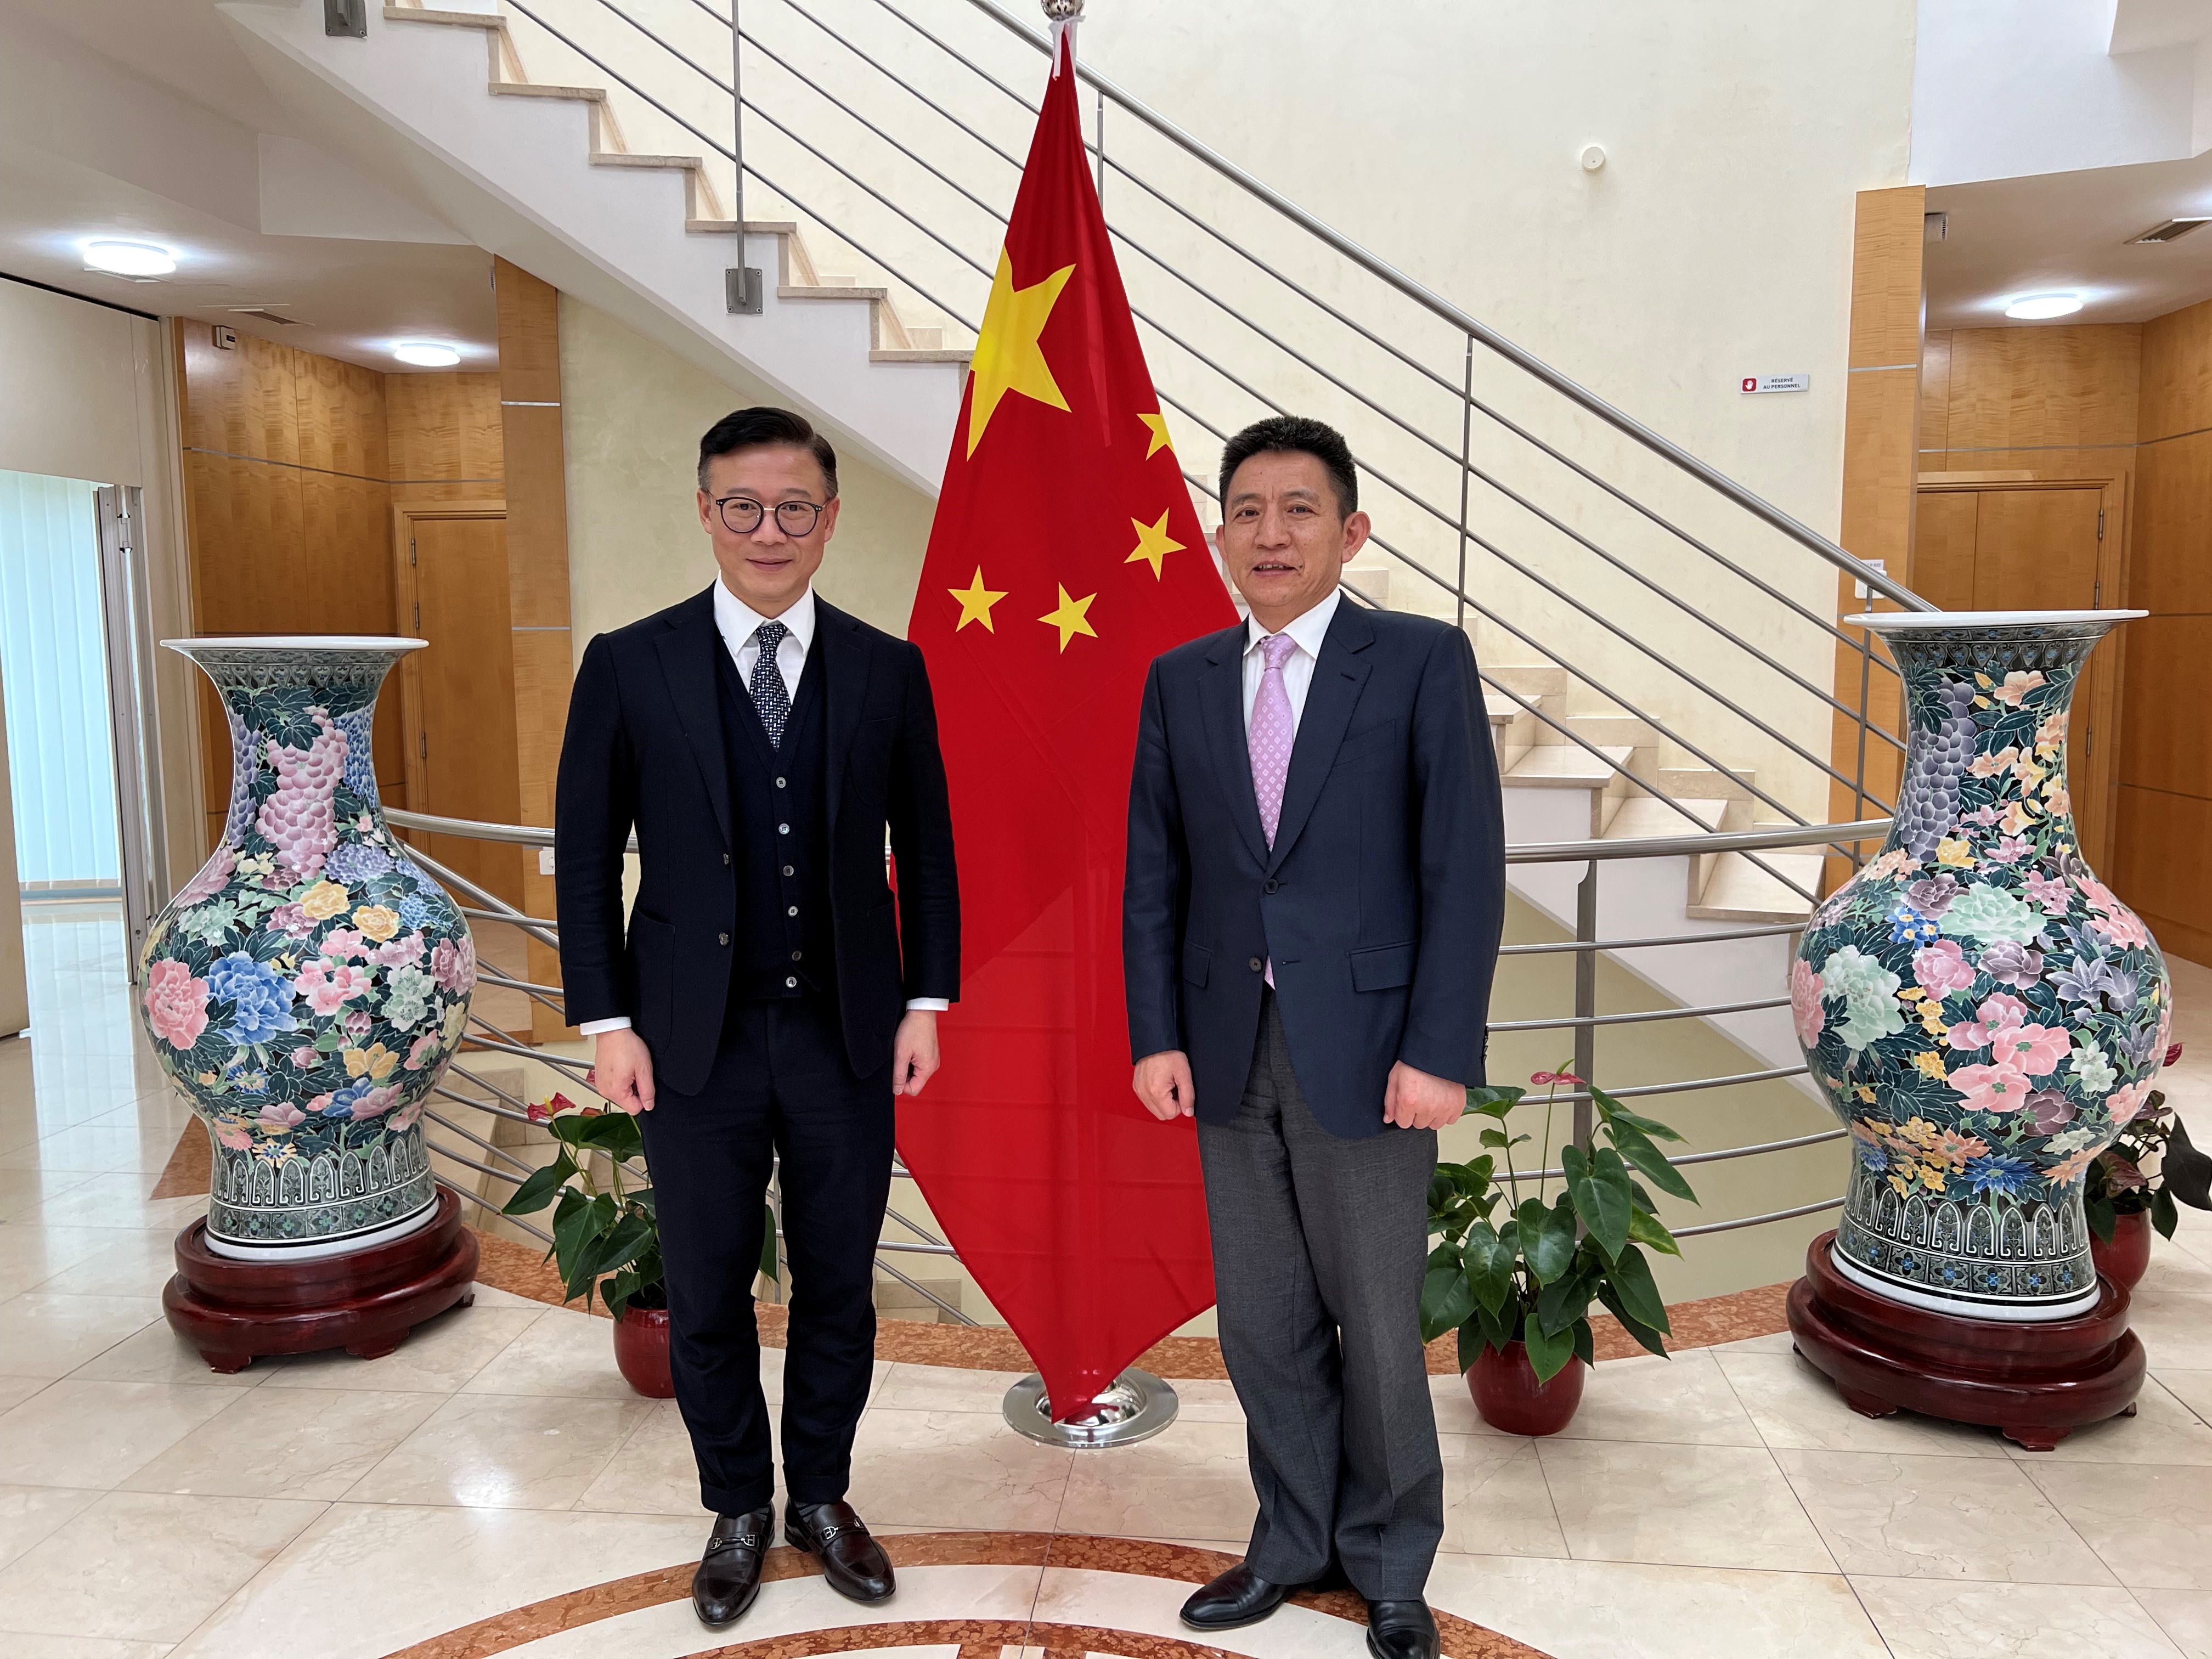 The Deputy Secretary for Justice, Mr Cheung Kwok-kwan (left), called on the Ambassador Extraordinary and Plenipotentiary and Permanent Representative of the People's Republic of China to the World Trade Organization, Mr Li Chenggang (right), in Geneva, Switzerland, on March 8 (Geneva time).